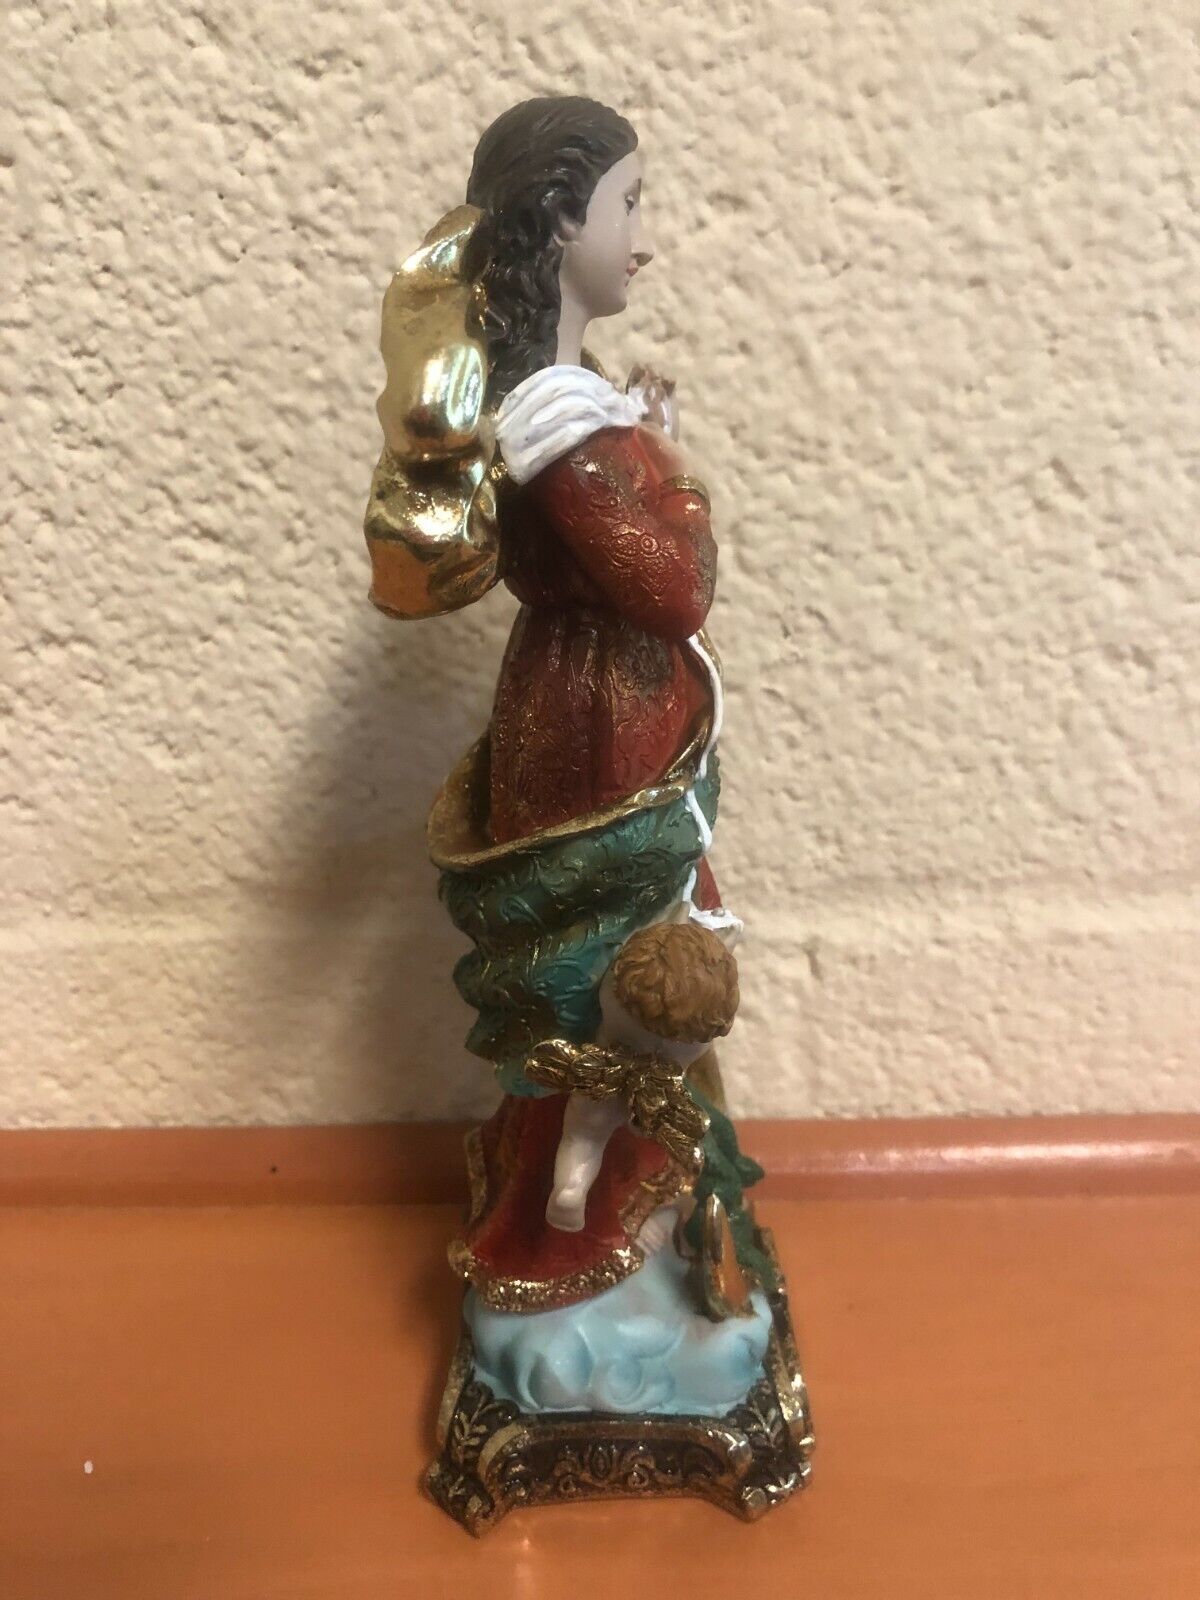 Our Lady Undoer (Untier) of Knots 8" Statue, New #2 - Bob and Penny Lord